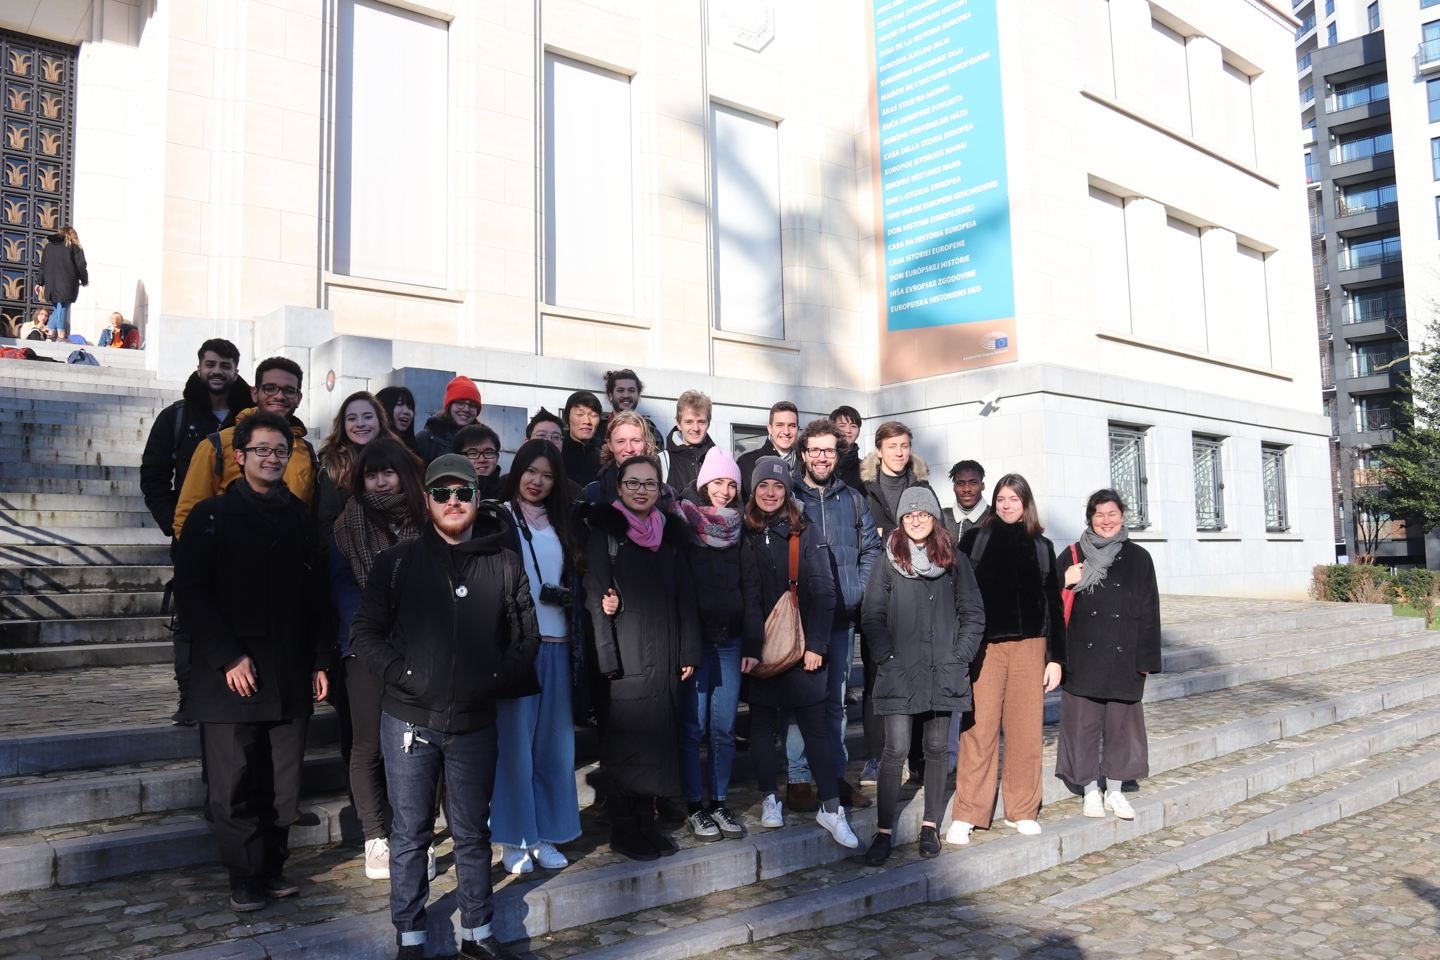 Group picture of the cologne global study program students on some stairs.